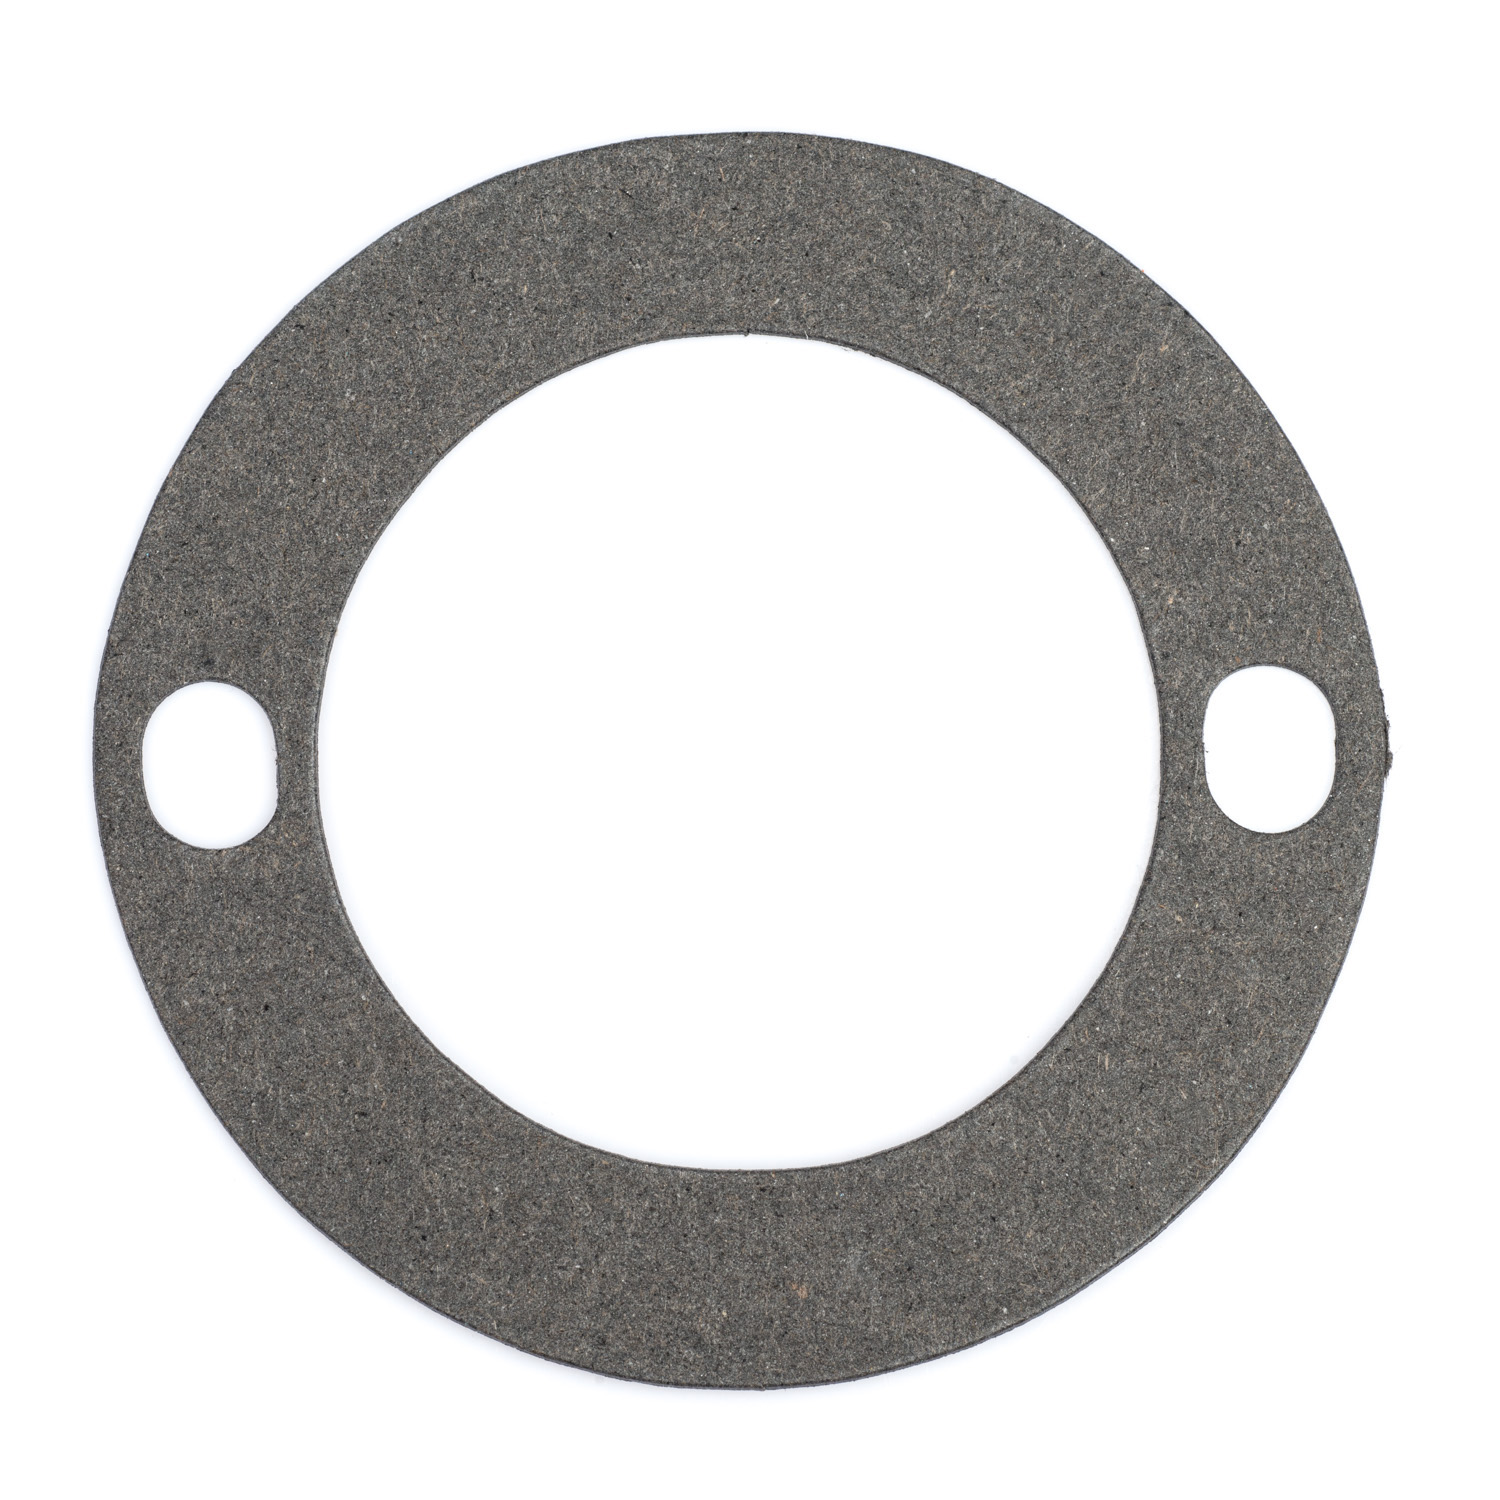 XS1 Oil Filter Strainer Cover Gasket